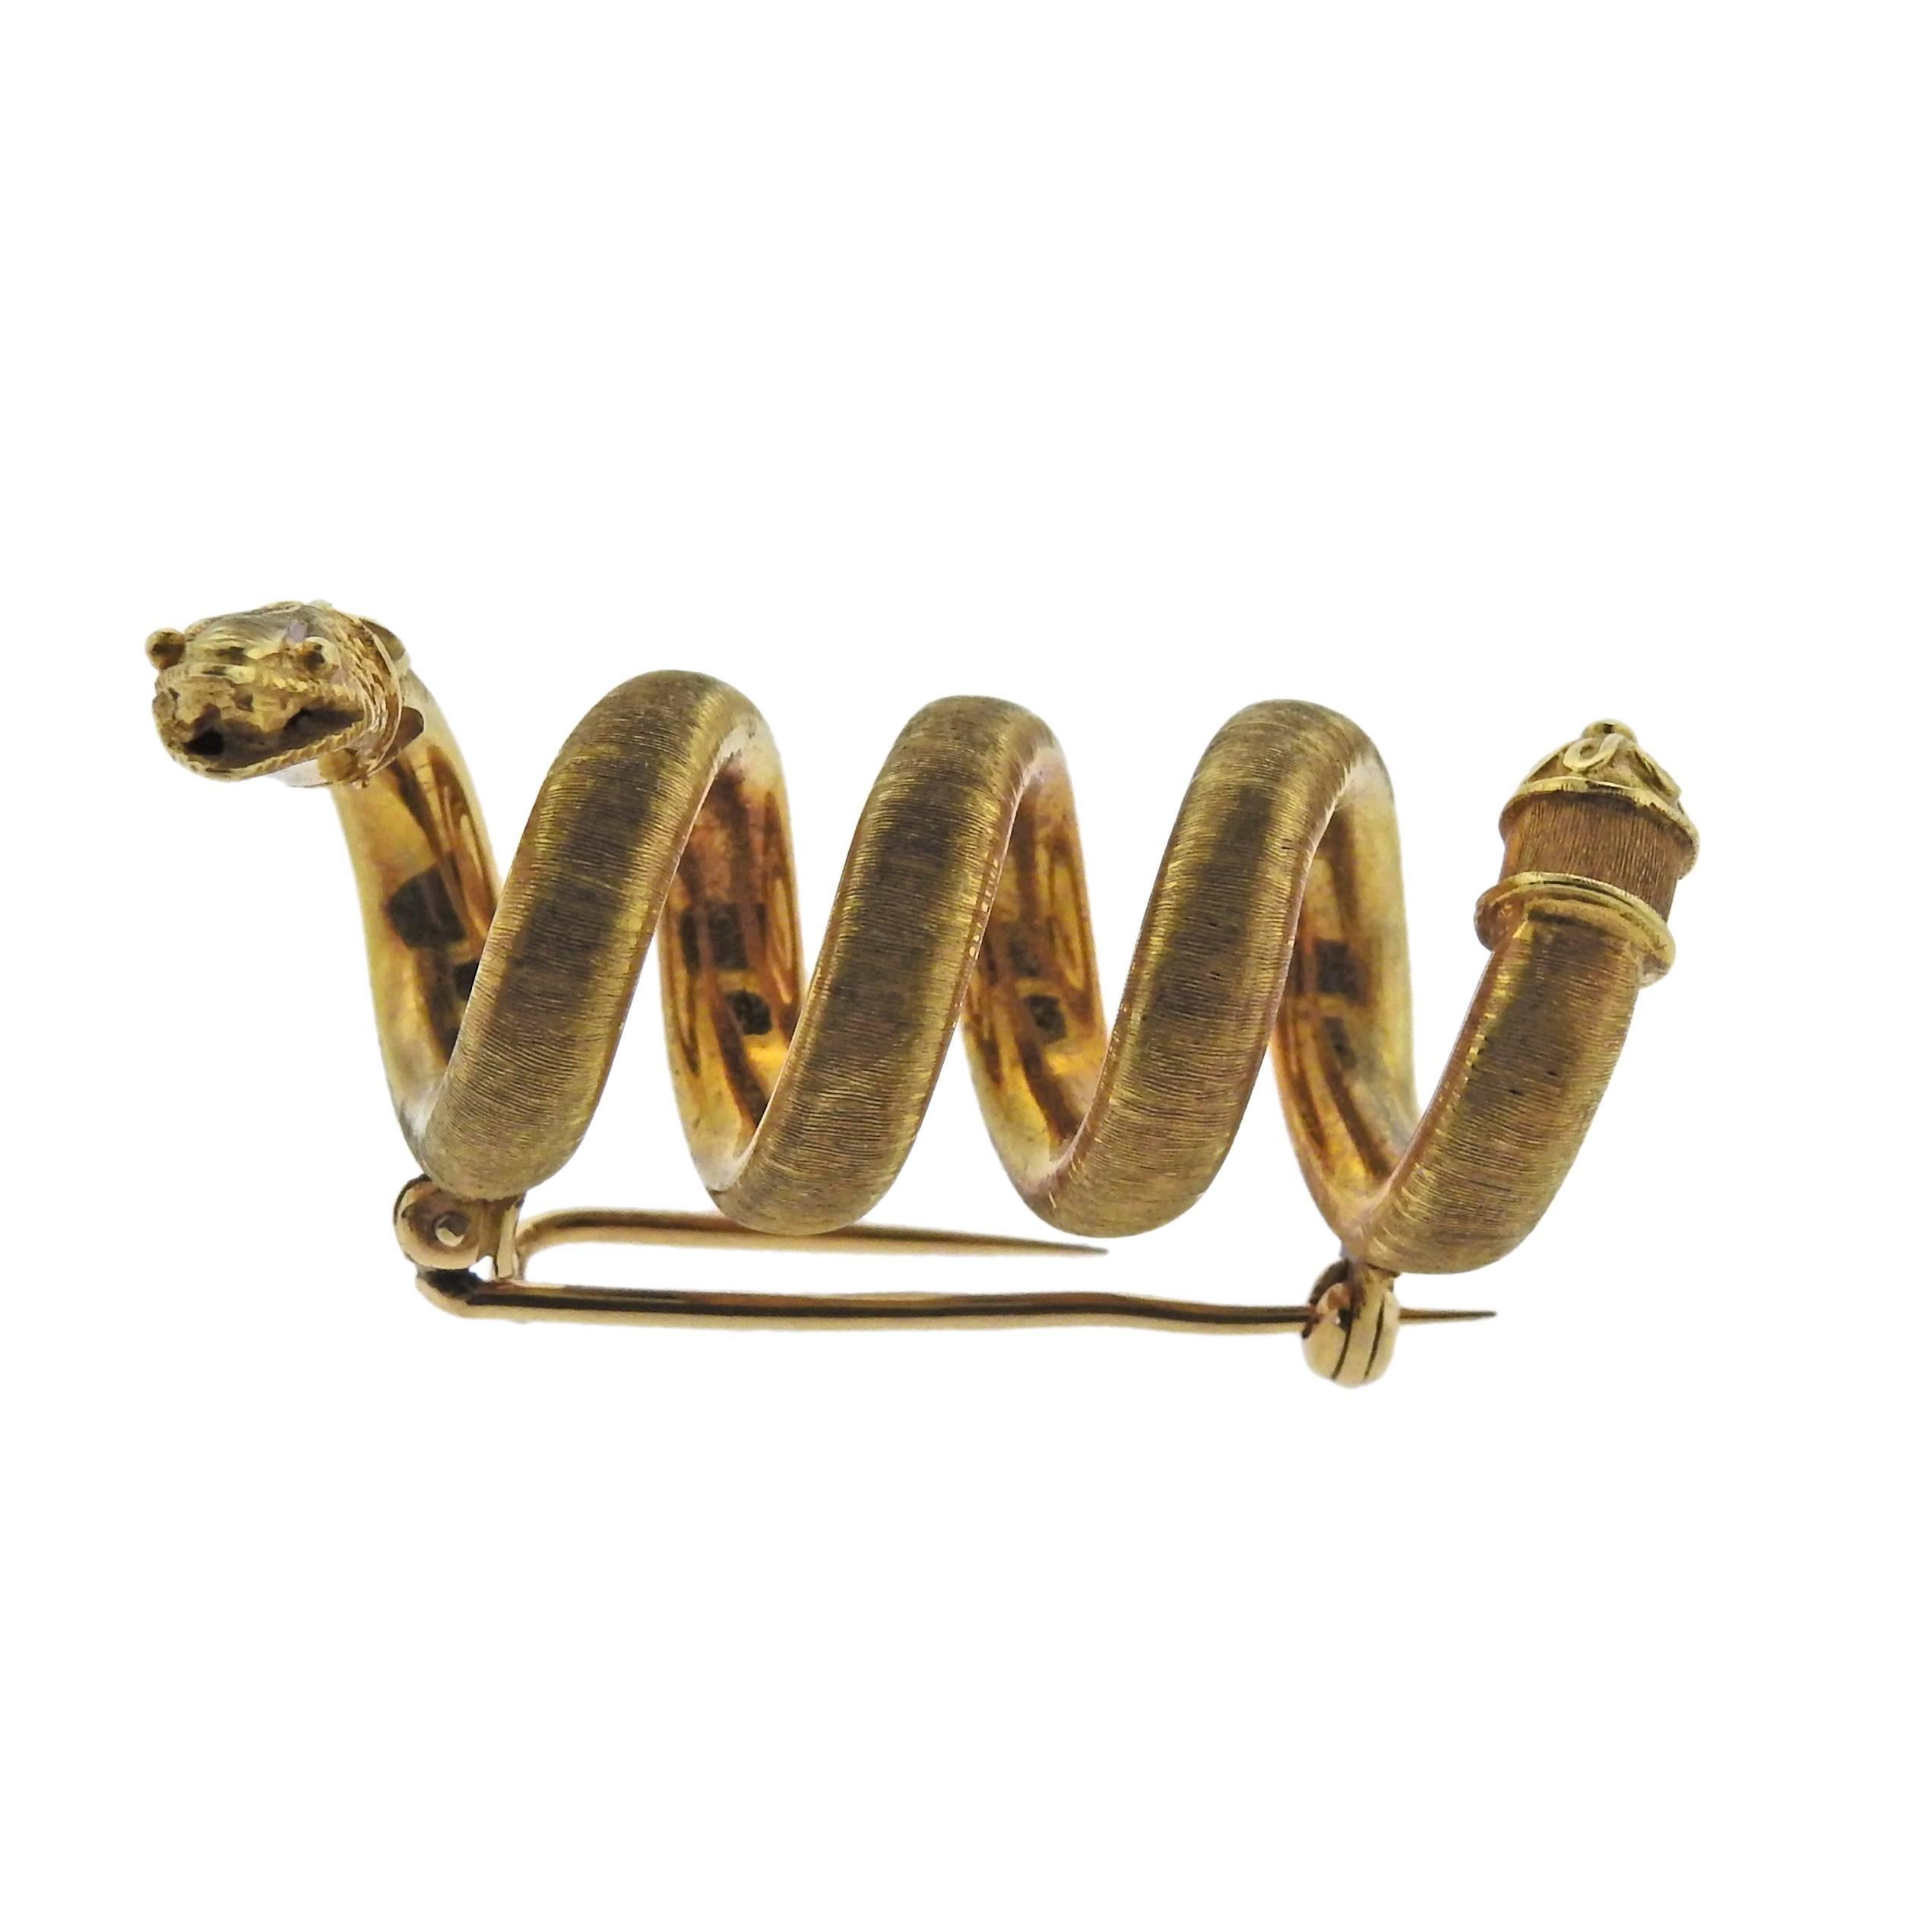 22k yelow gold snake brooch, crafted in Greece. Brooch is 44mm ong x 20mm wide, weighs 30.3 grams.